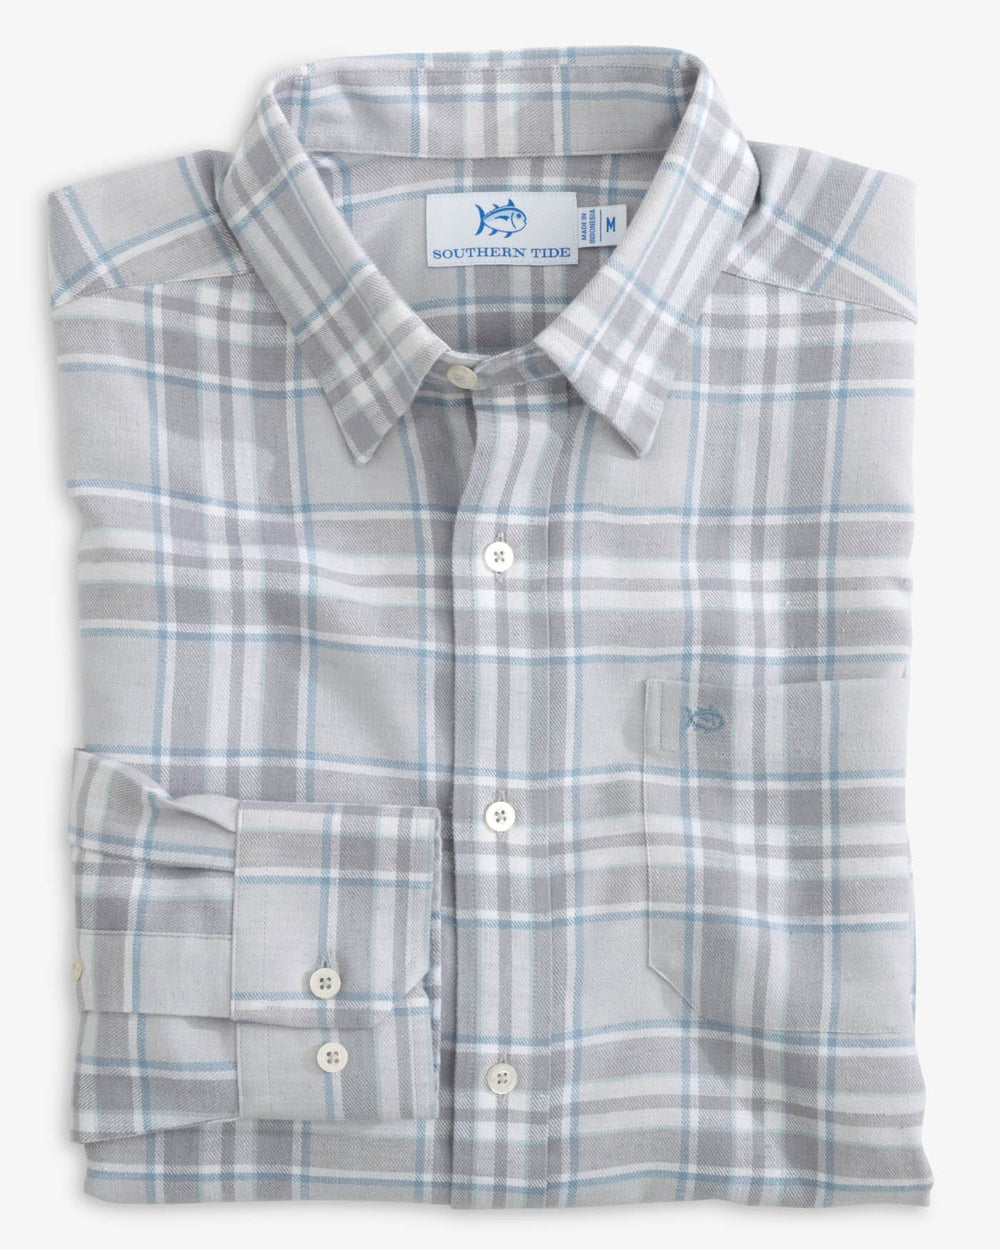 The folded view of the Southern Tide Beach Flannel Heather Reddick Plaid Sport Shirt by Southern Tide - Heather Platinum Grey